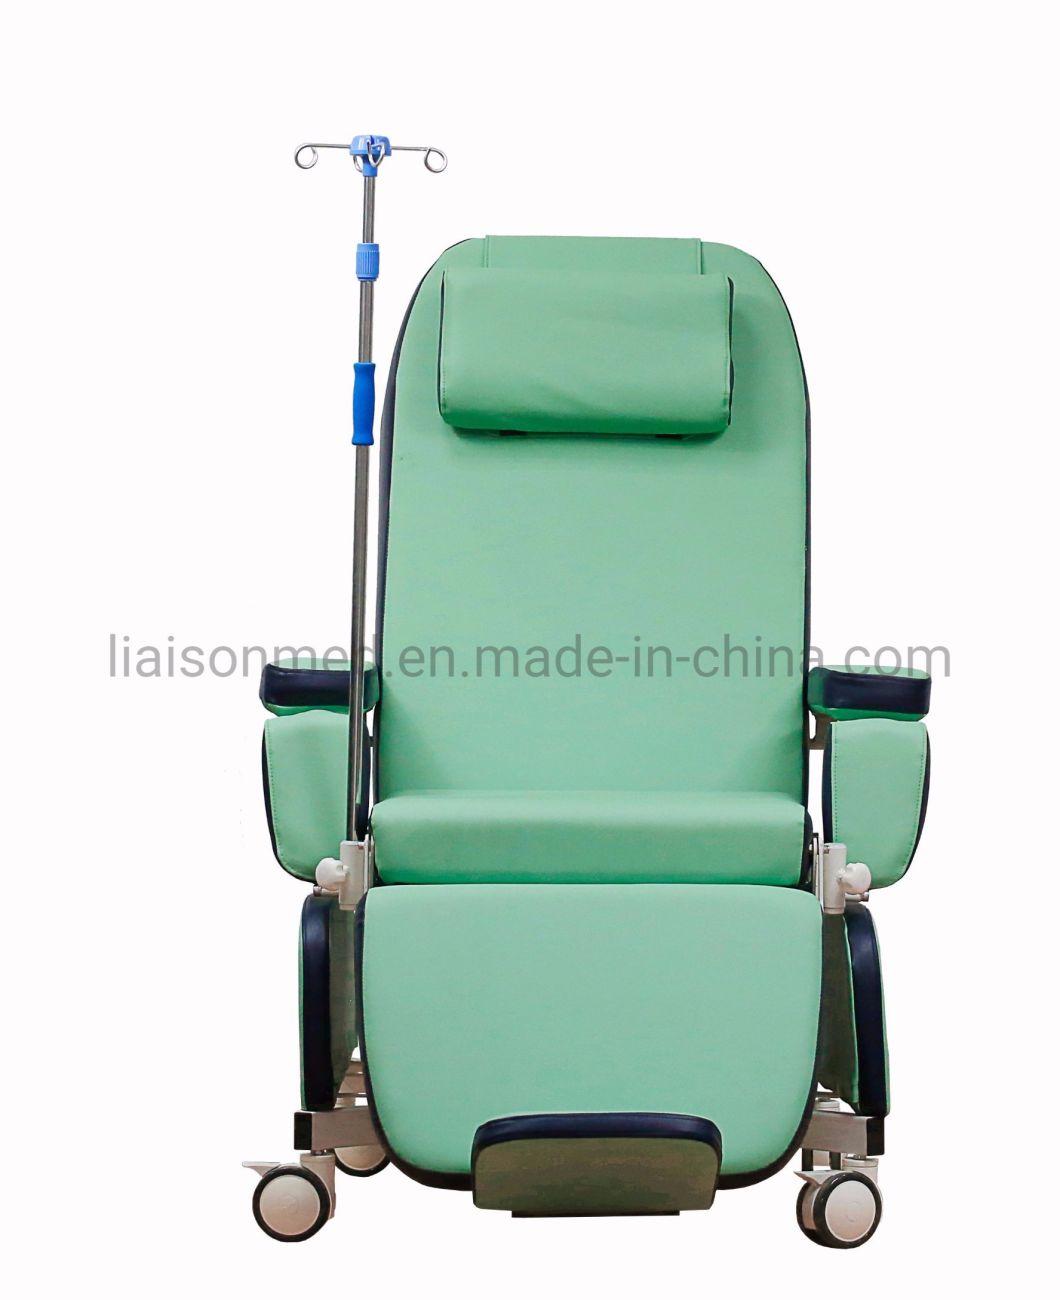 Mn-Bdc002 Medical Equipment Hospital Furniture Electric Dialysis Gynecology Chair